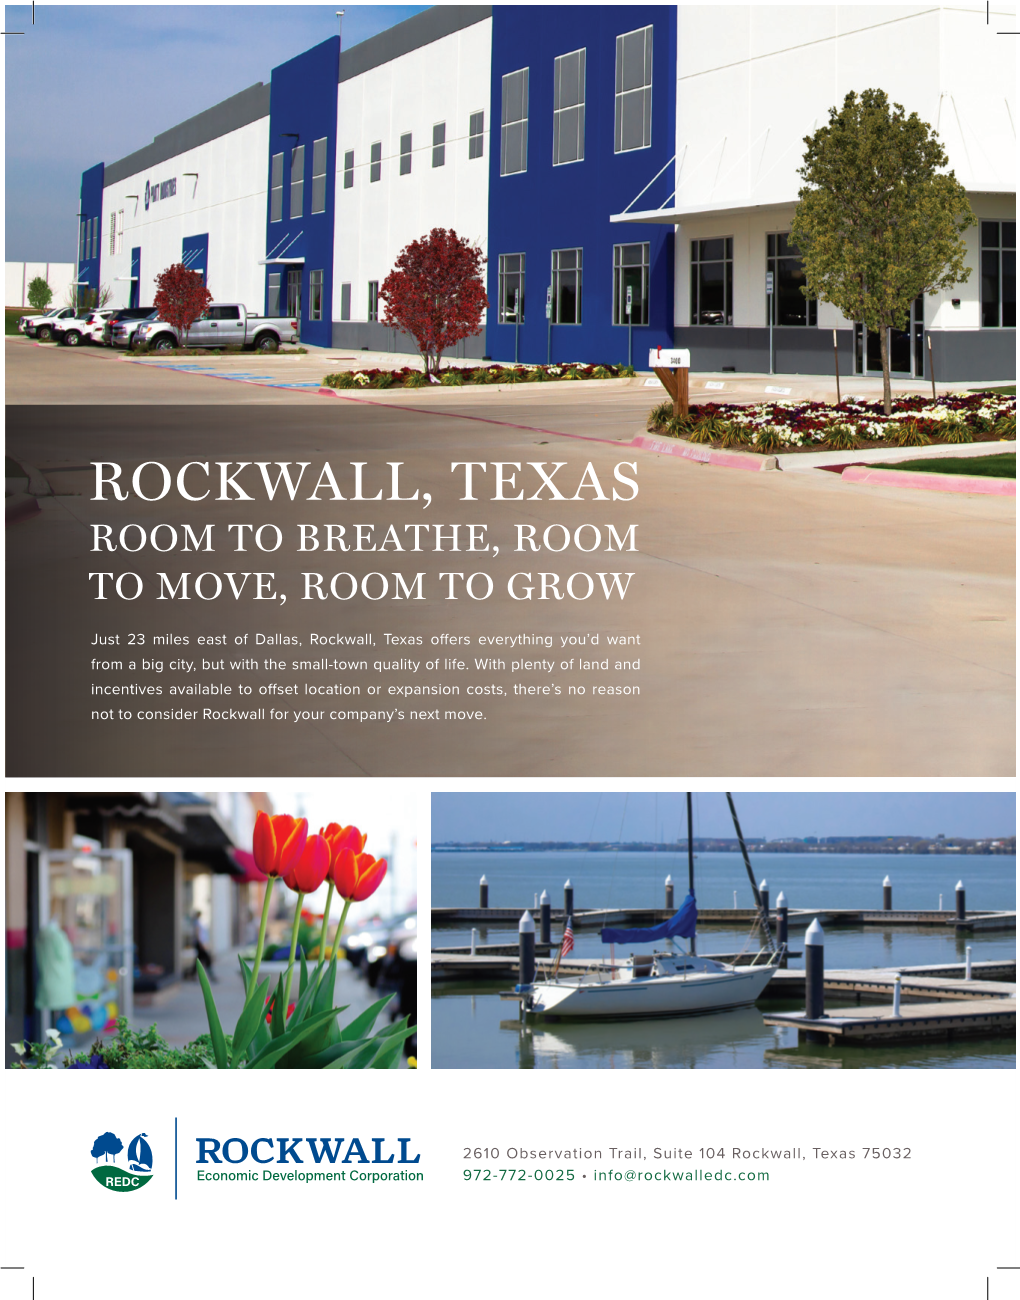 Just 23 Miles East of Dallas, Rockwall, Texas Offers Everything You’D Want from a Big City, but with the Small-Town Quality of Life